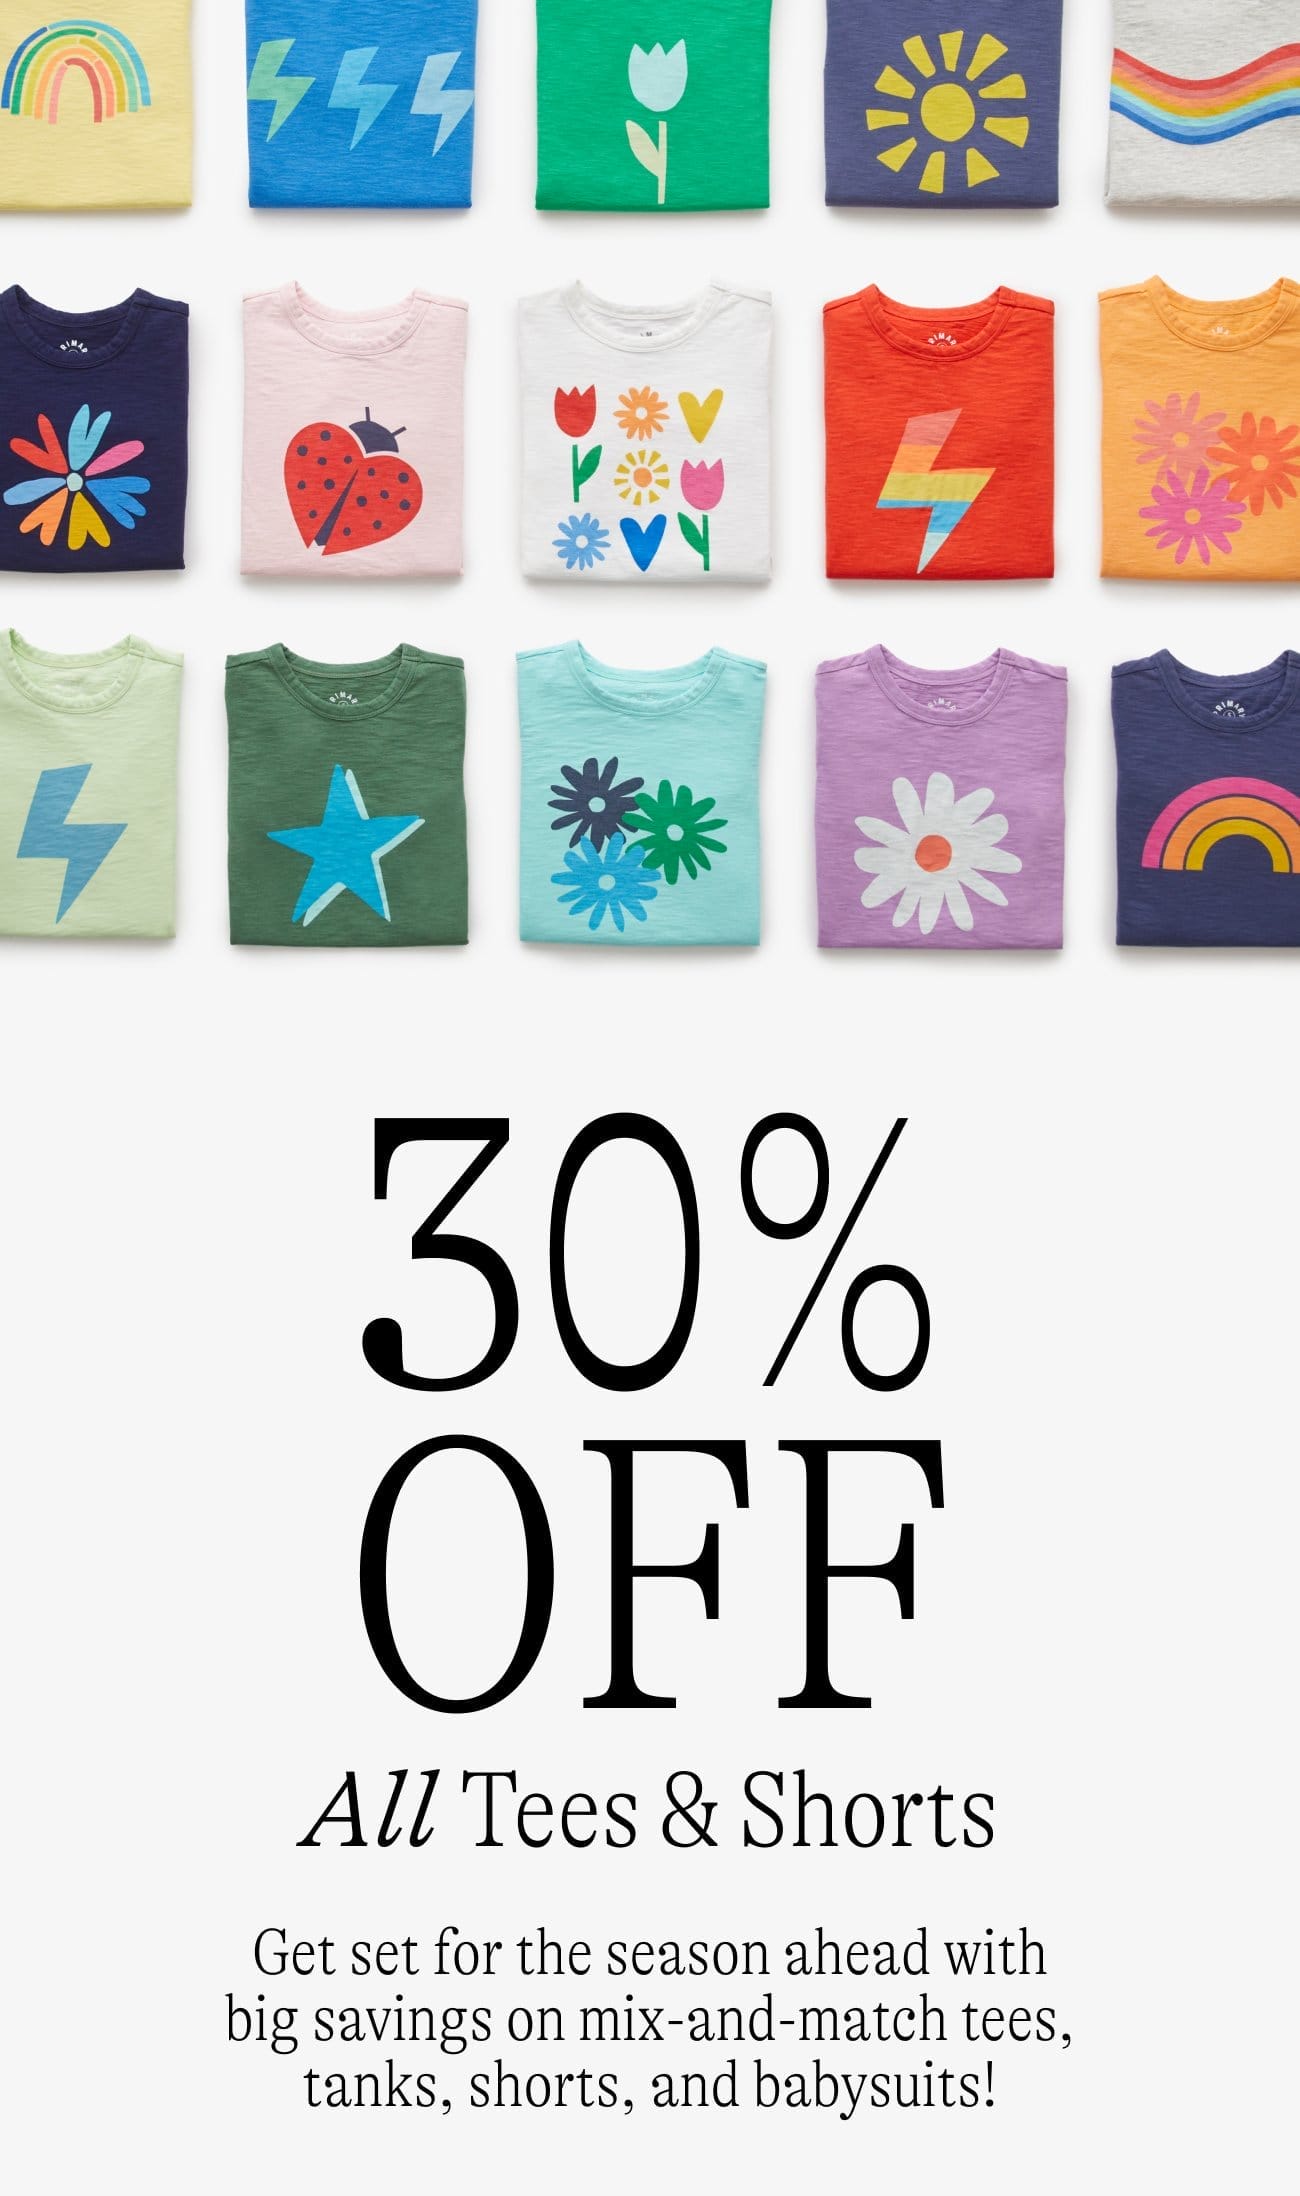 30% OFF All Tees & Shorts Get set for the season ahead with big savings on mix-and-match tees, tanks, shorts, and babysuits!